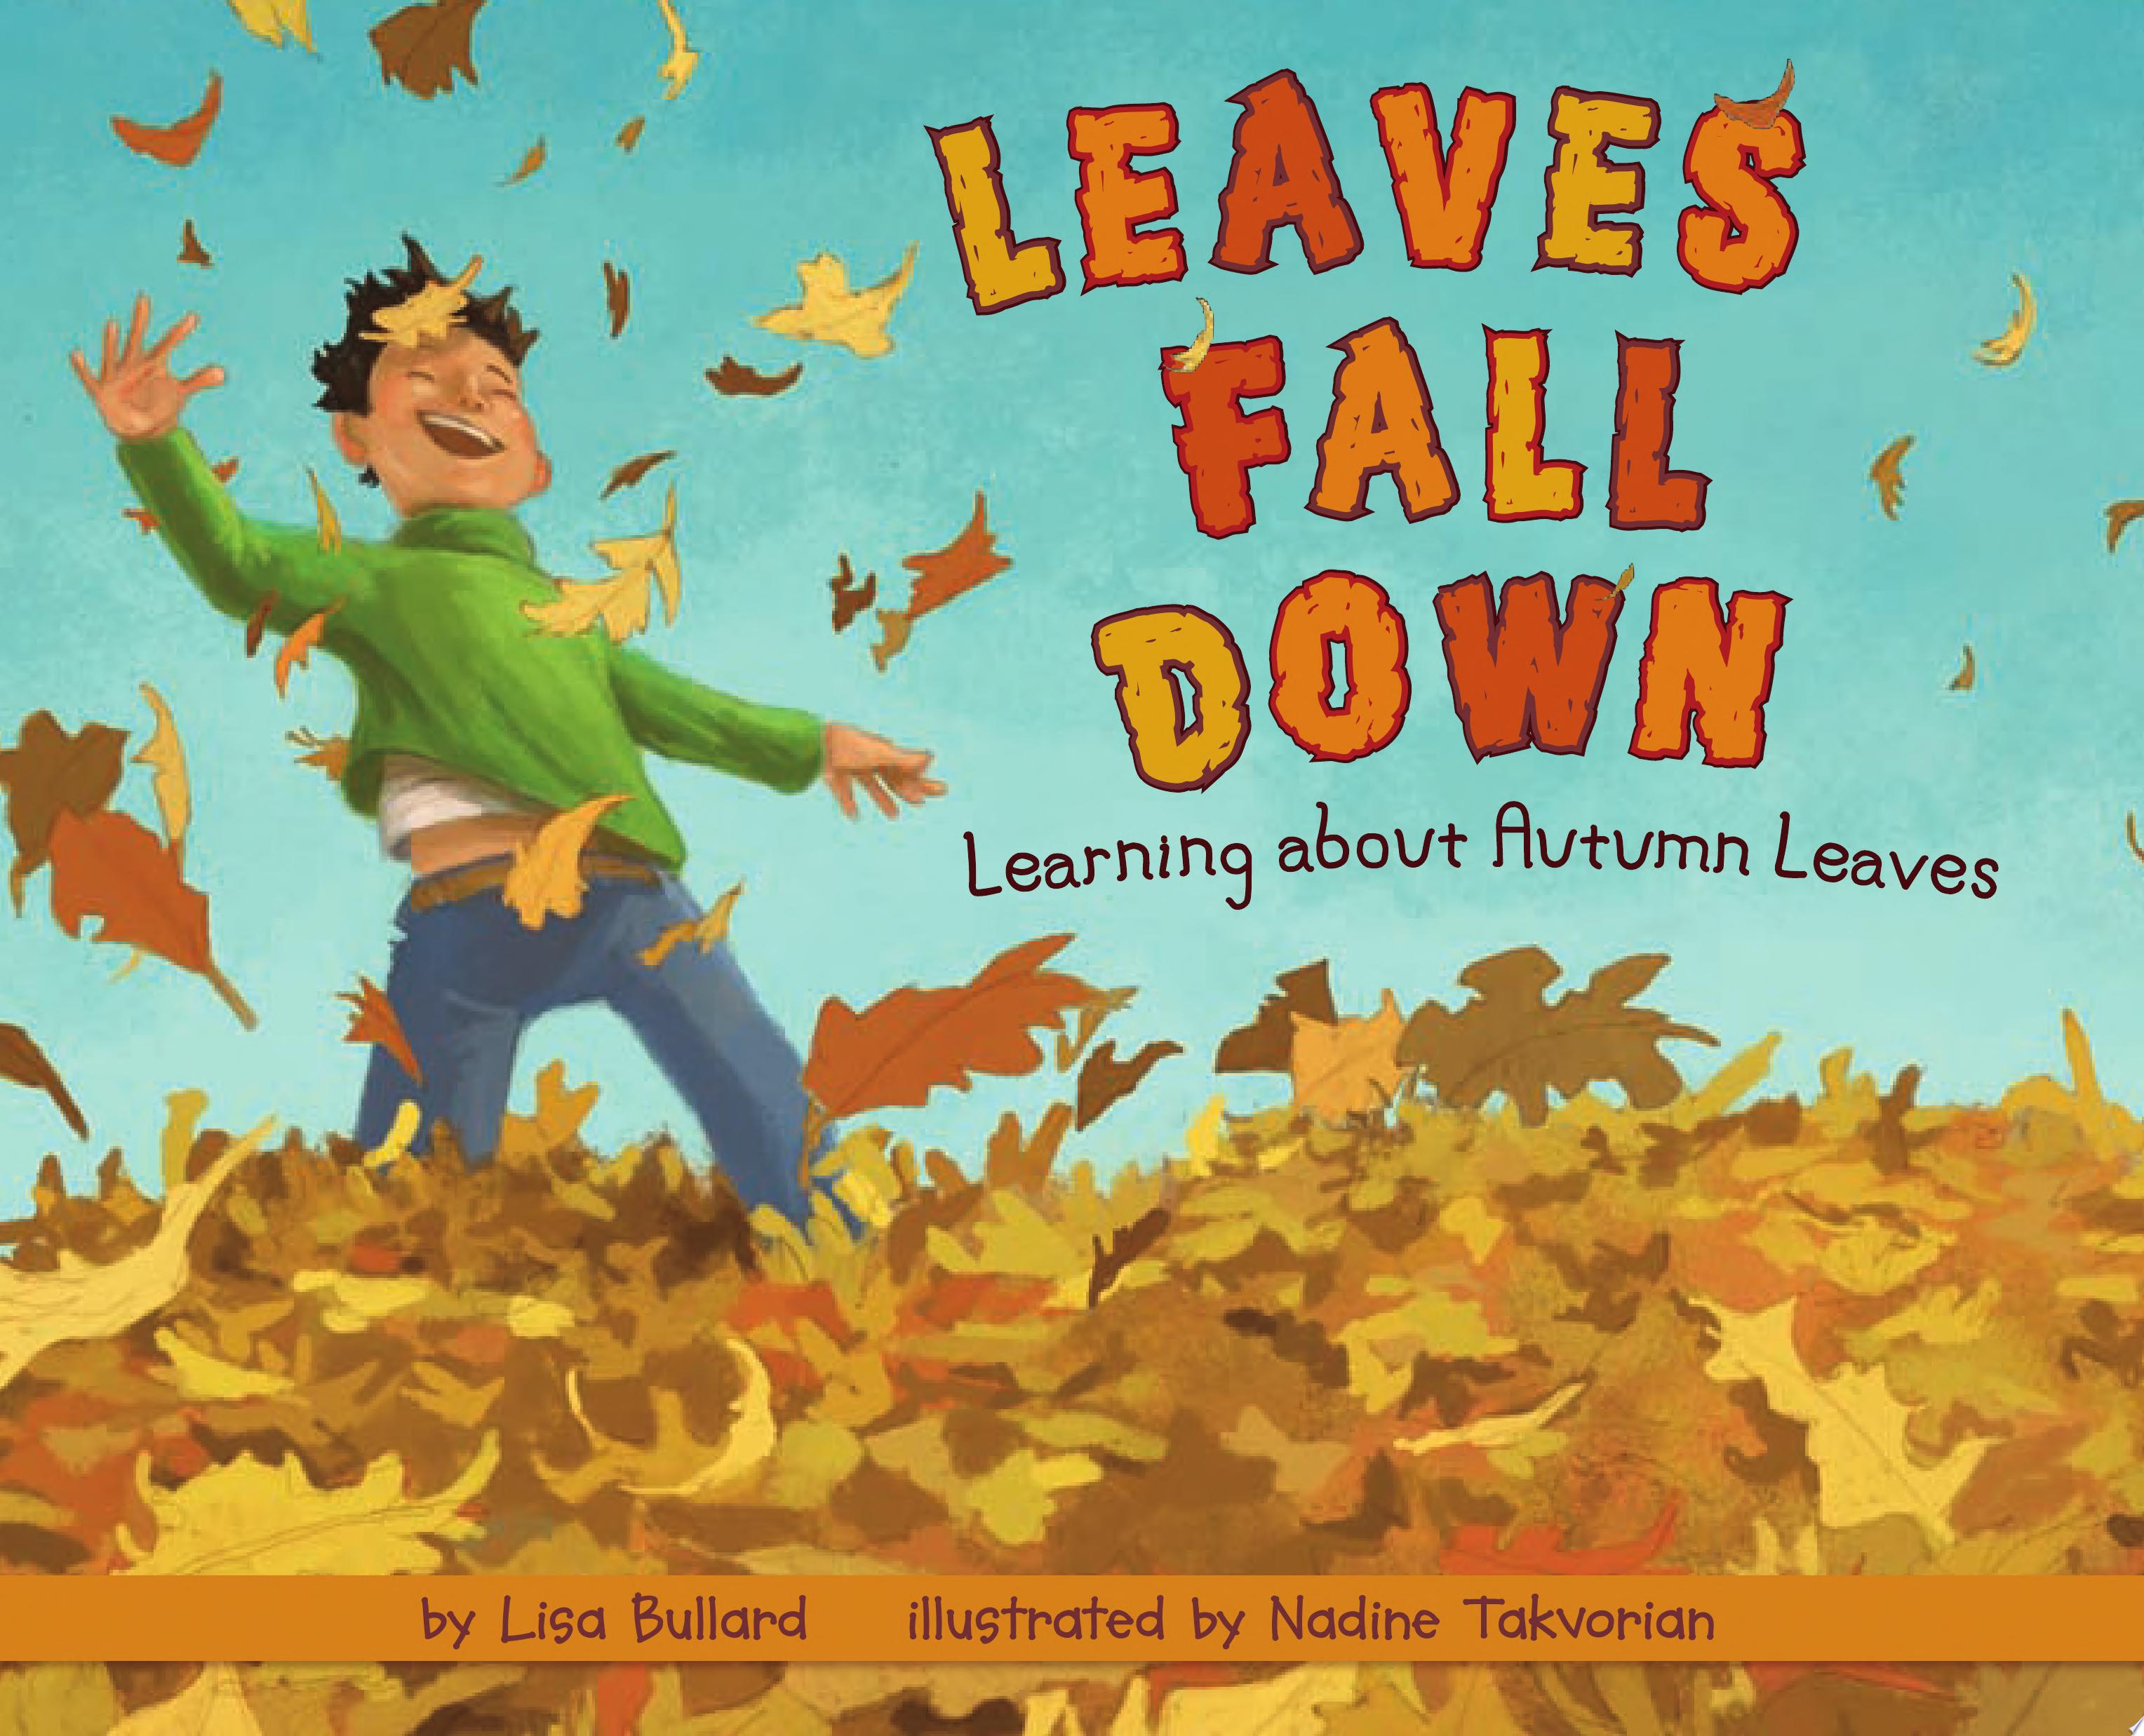 Image for "Leaves Fall Down"